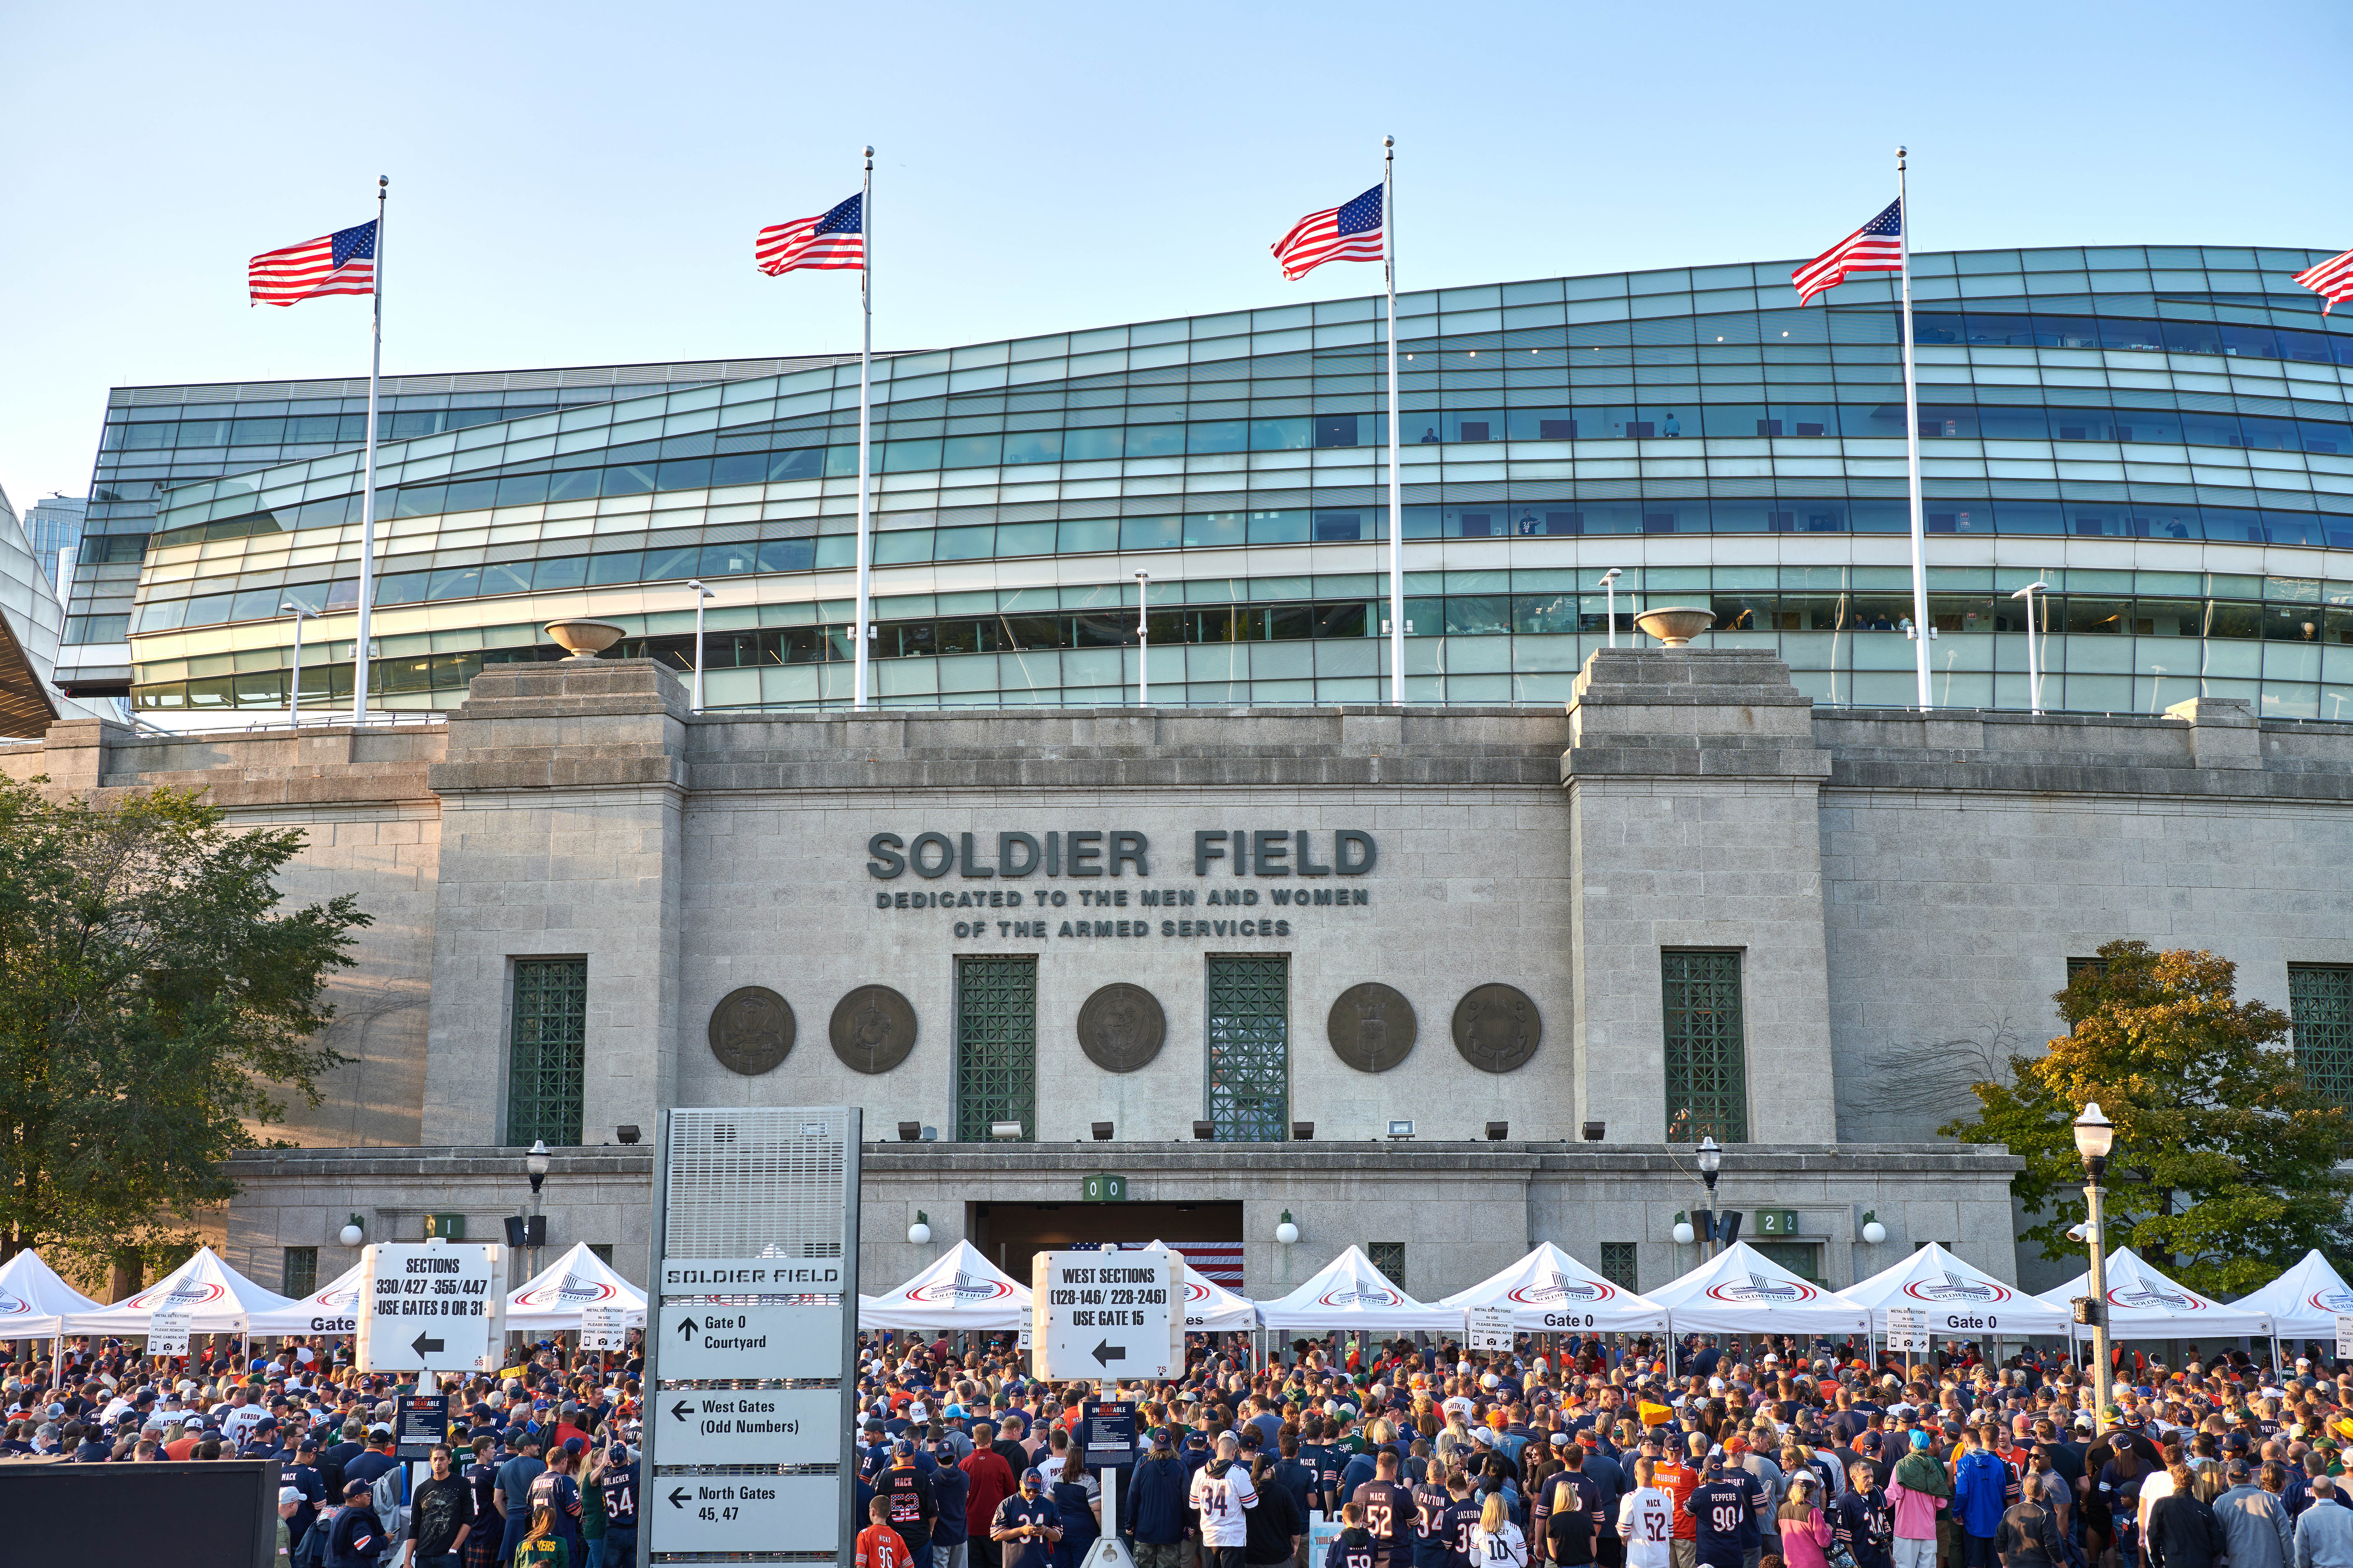 Fans enter Soldier Field in Chicago on September 5, 2019, for a Chicago Bears game against the Green Bay Packers.